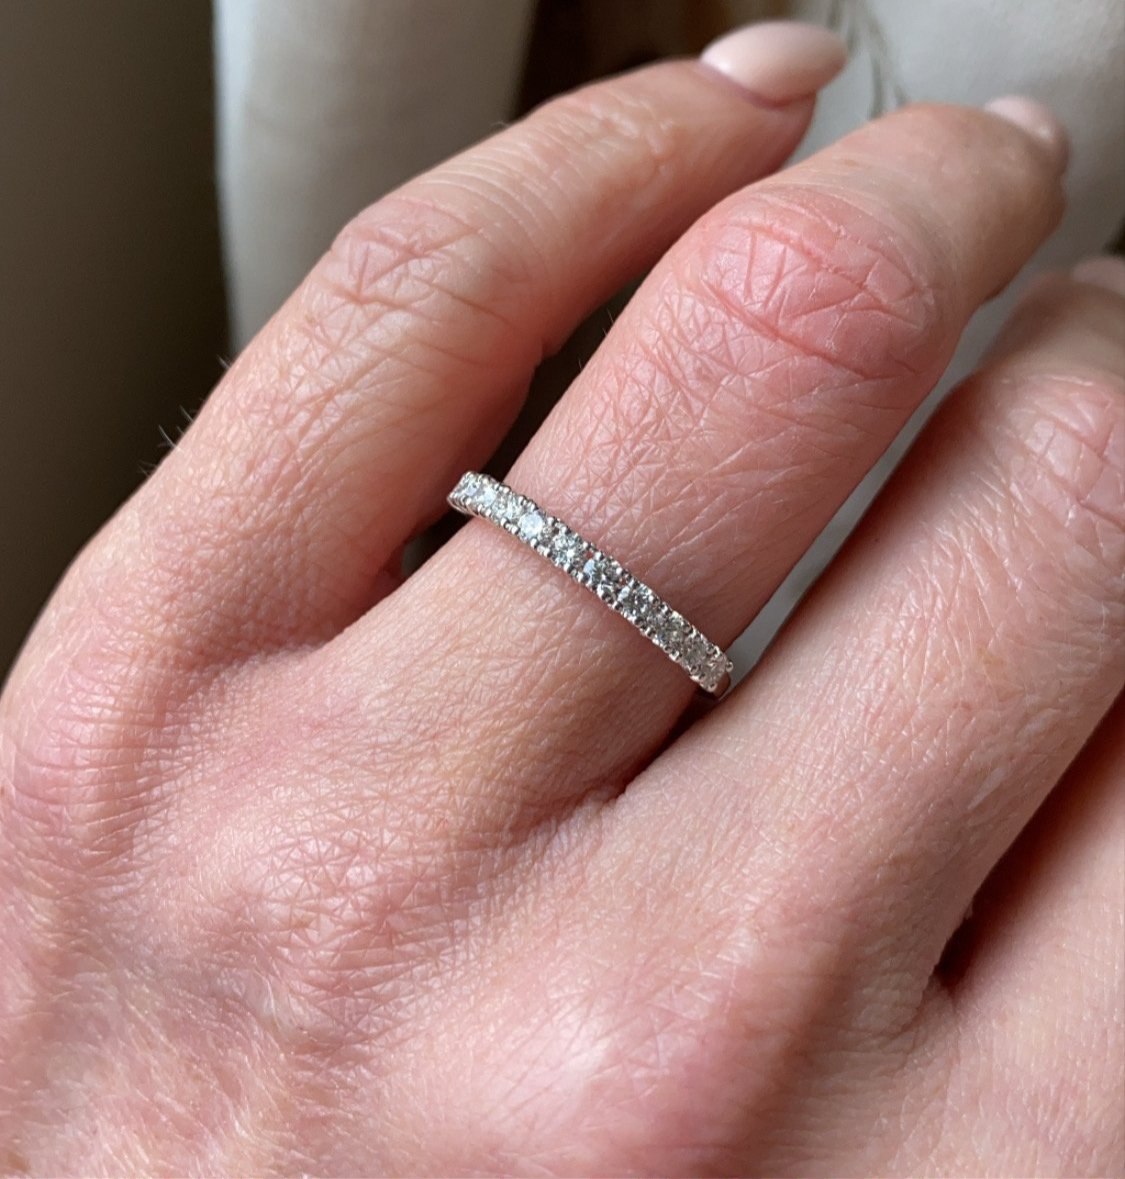 18ct white gold diamond eternity ring set with eleven round brilliant cut diamonds. 0.47ct in total. G colour. VS clarity. 2mm diameter . This ring is suitable as a wedding band or eternity ring. Size O Other sizes by special order.